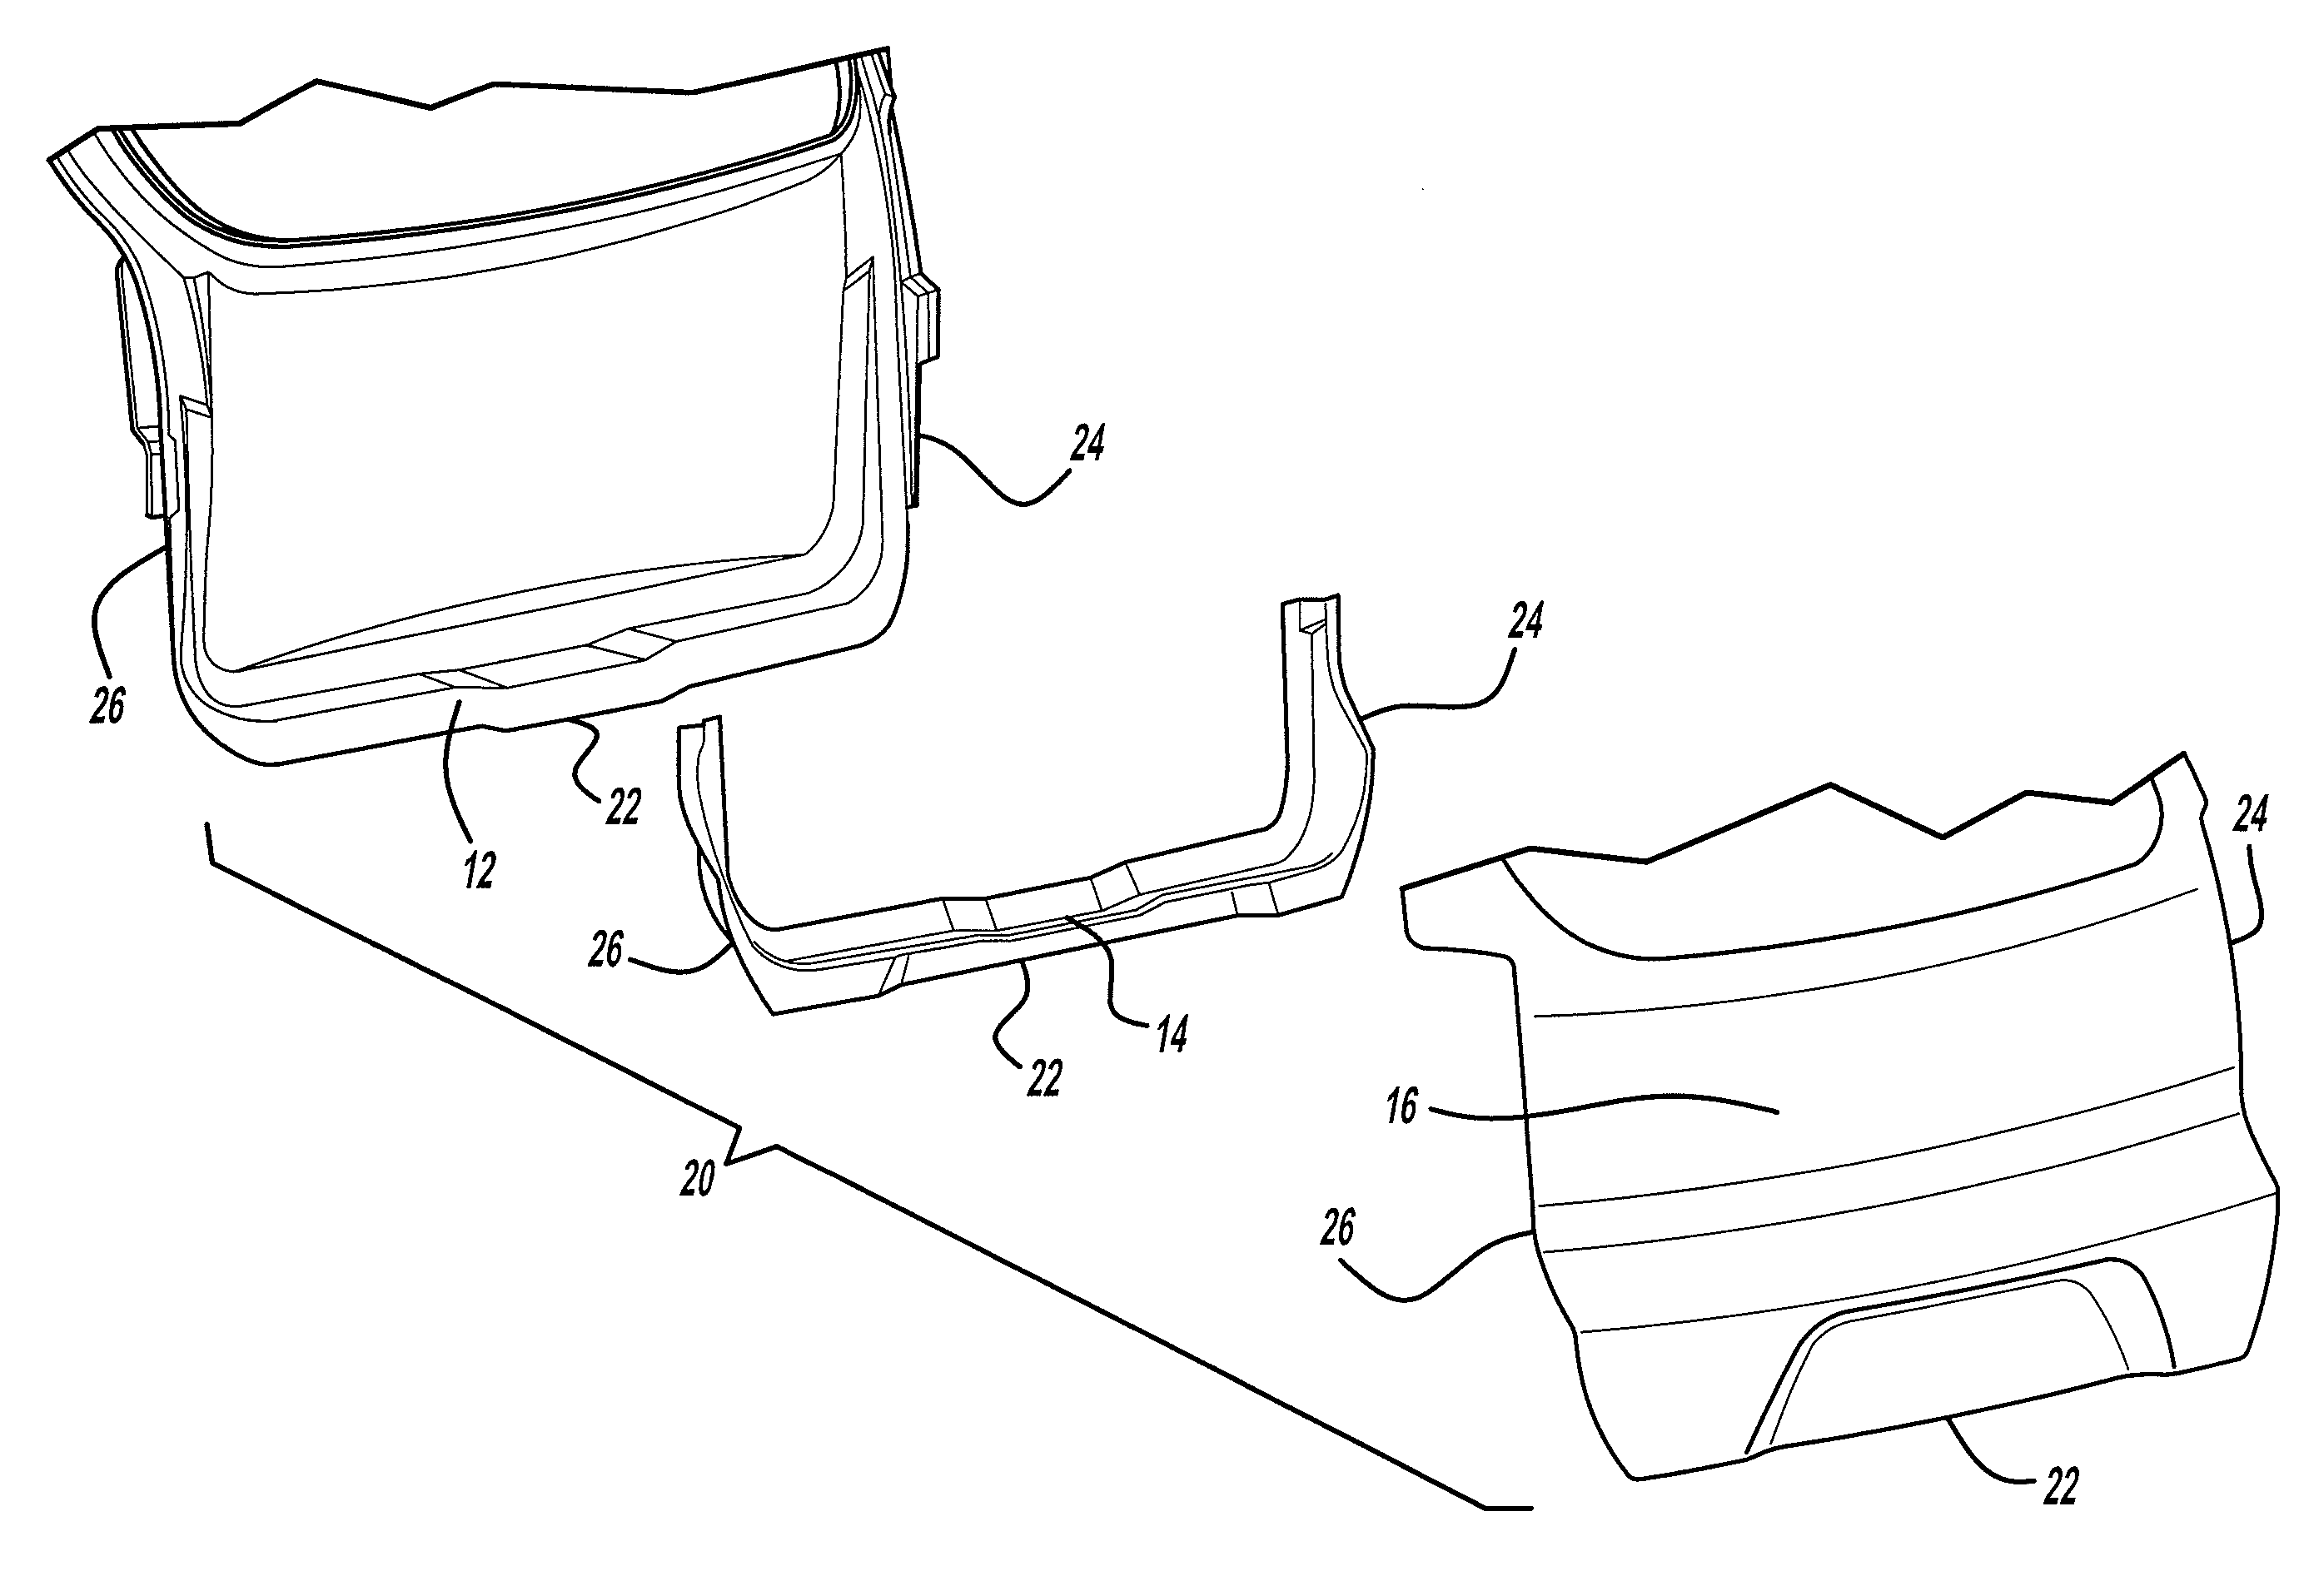 Composite lift gate deformable section